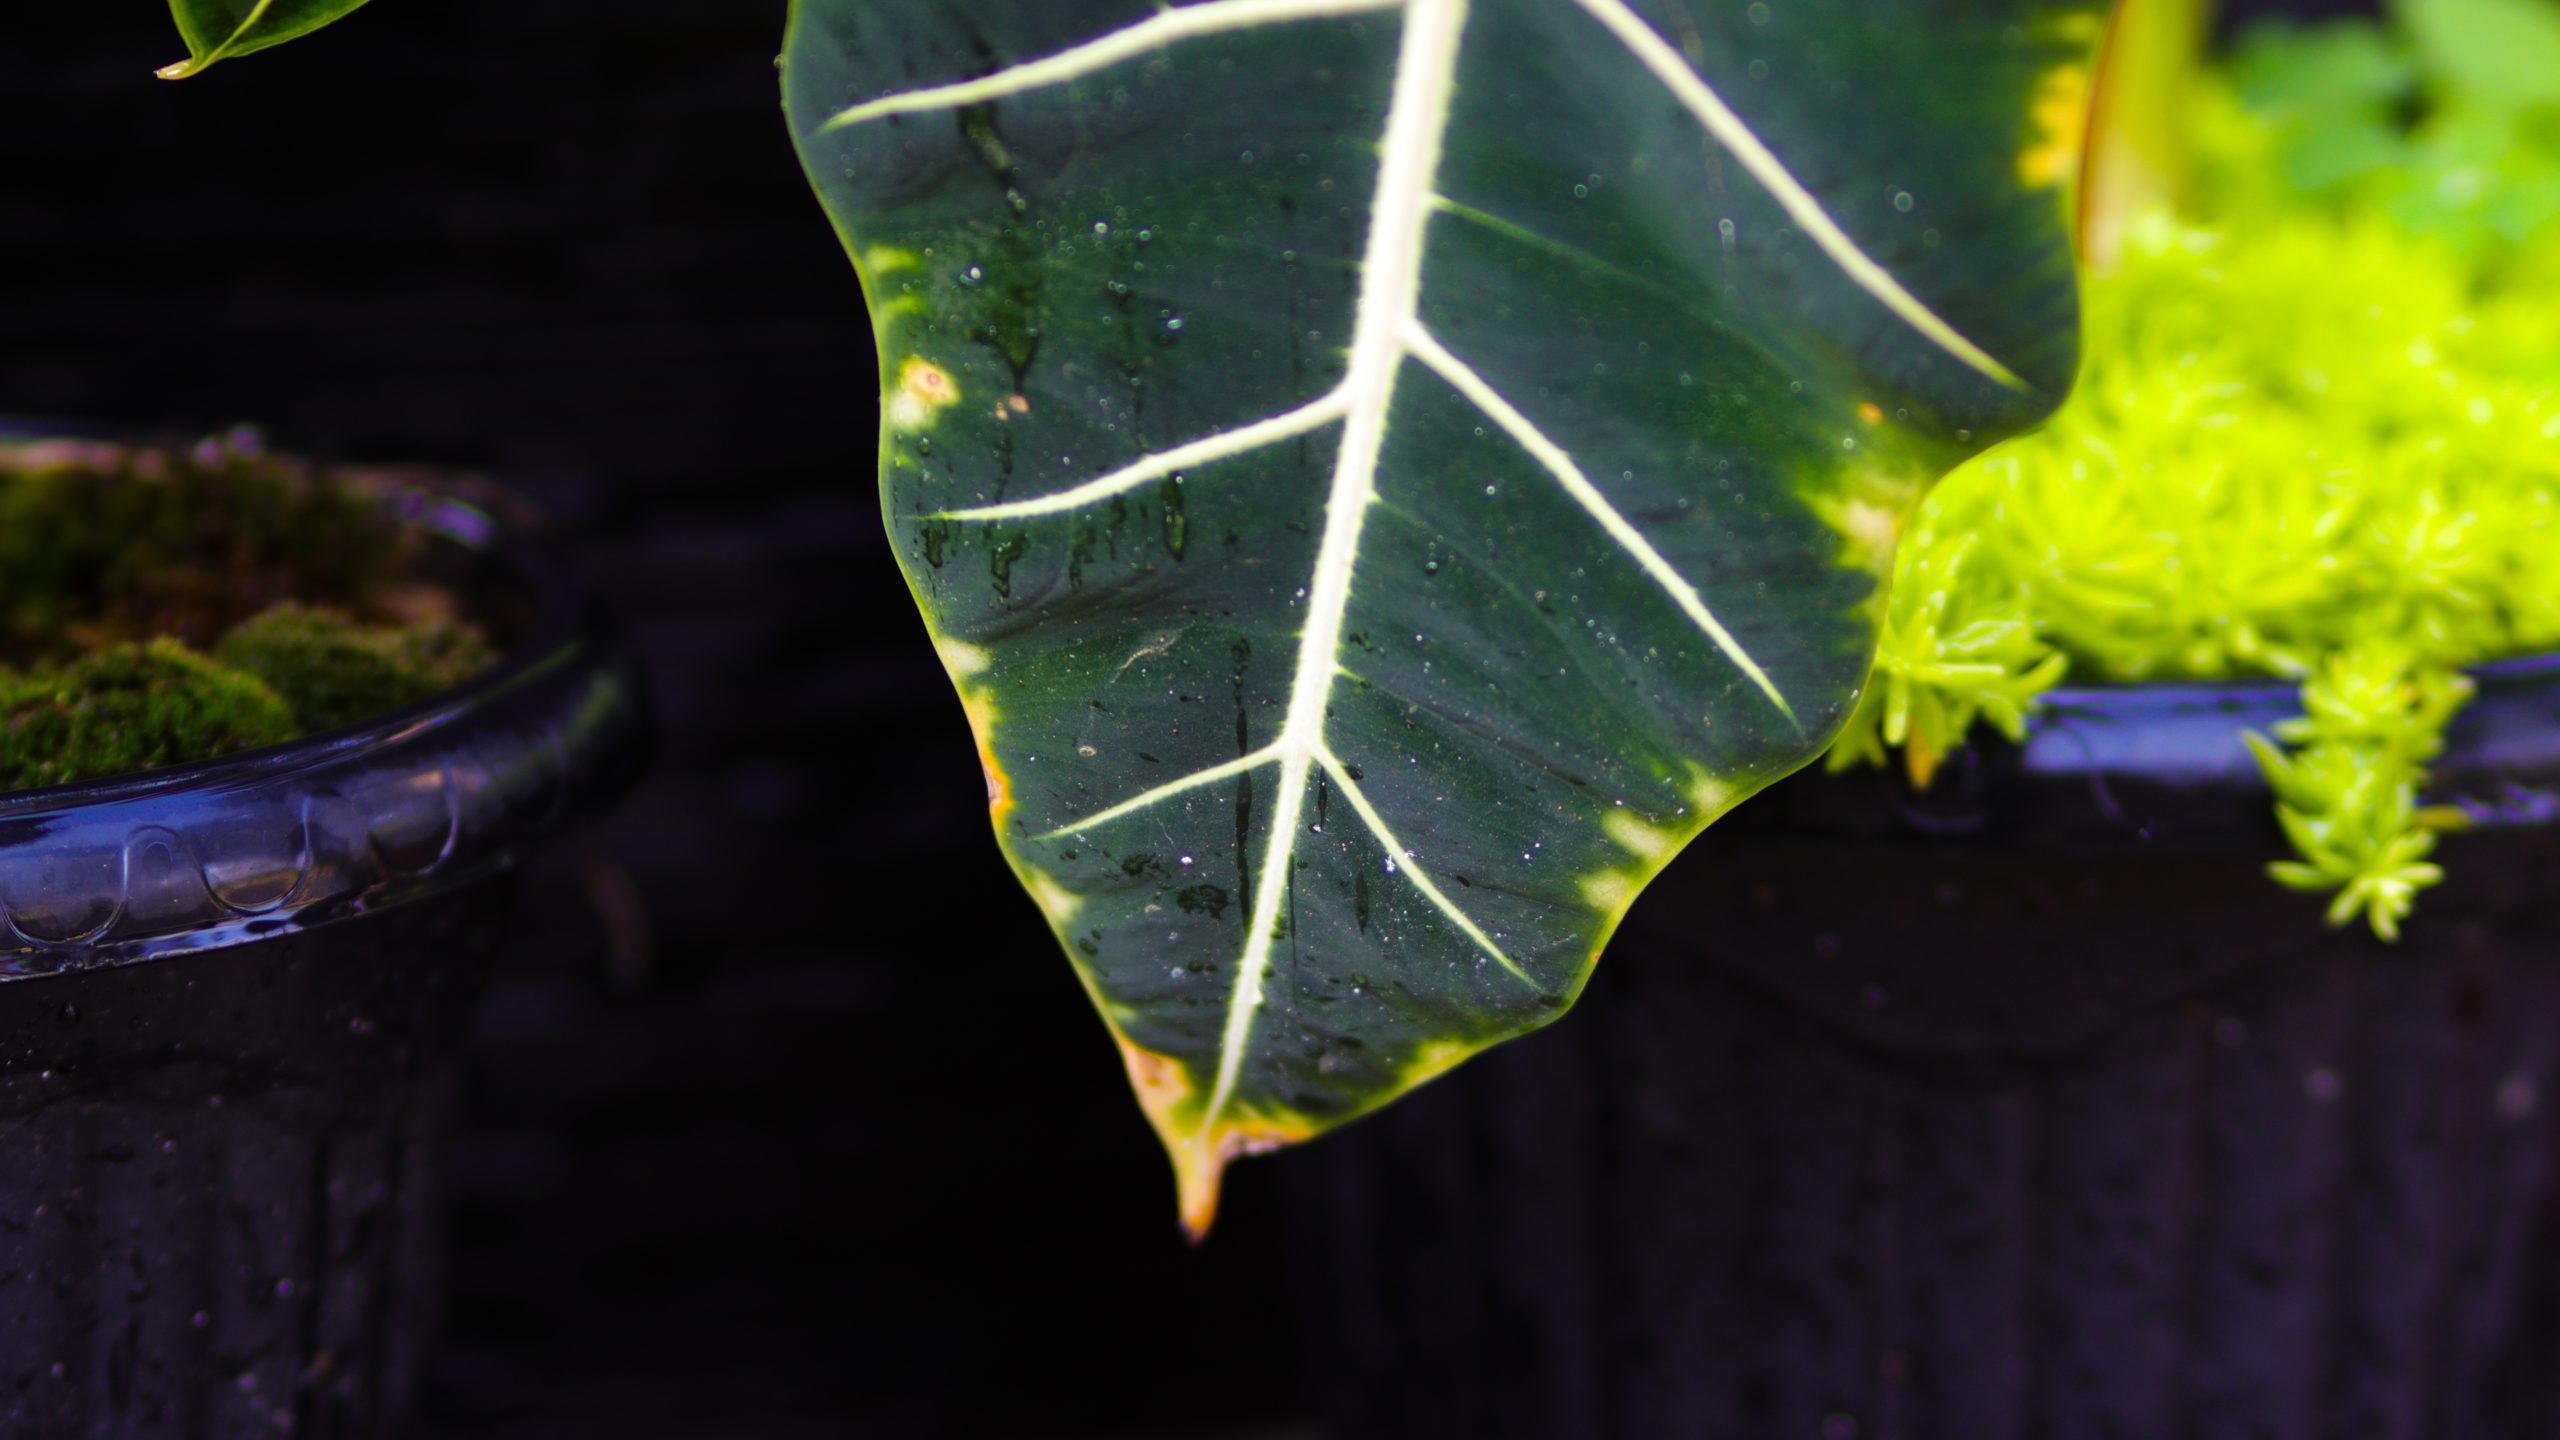 Alocasia with yellow leaves